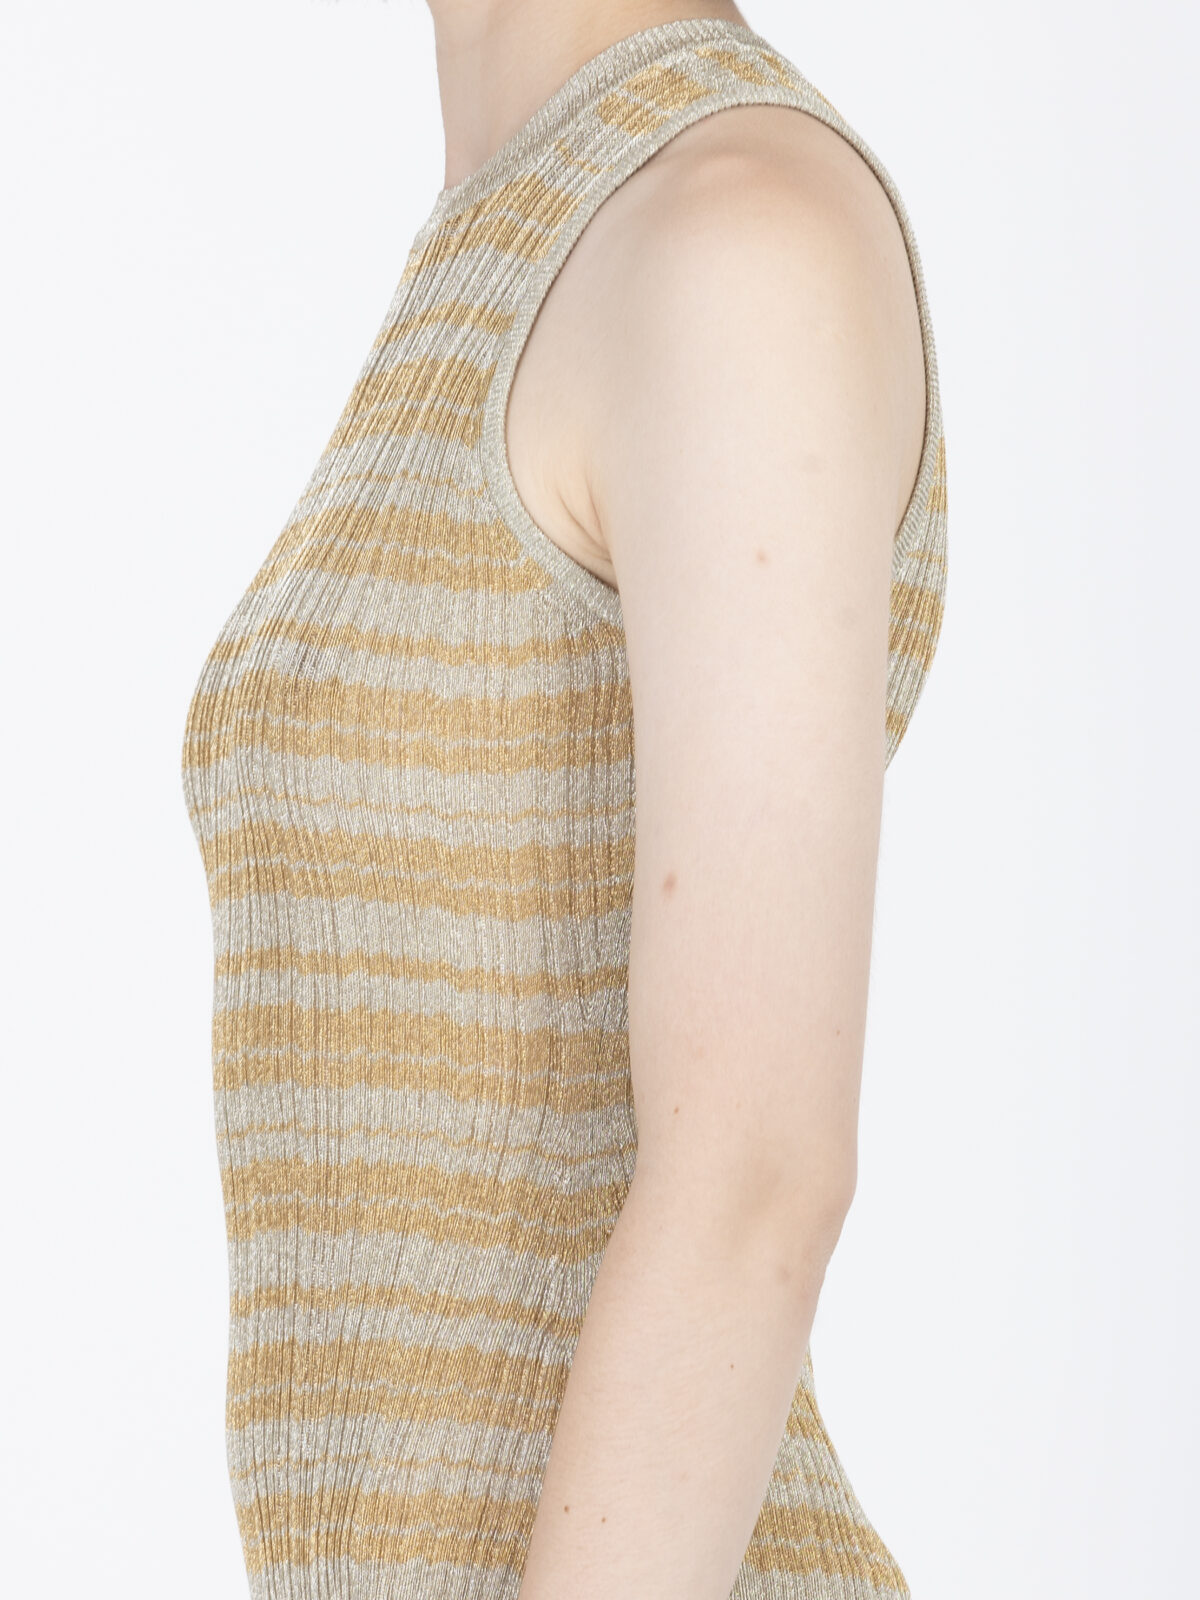 zola-gold-knitted-dress-fitted-striped-bash-matchbxoathens